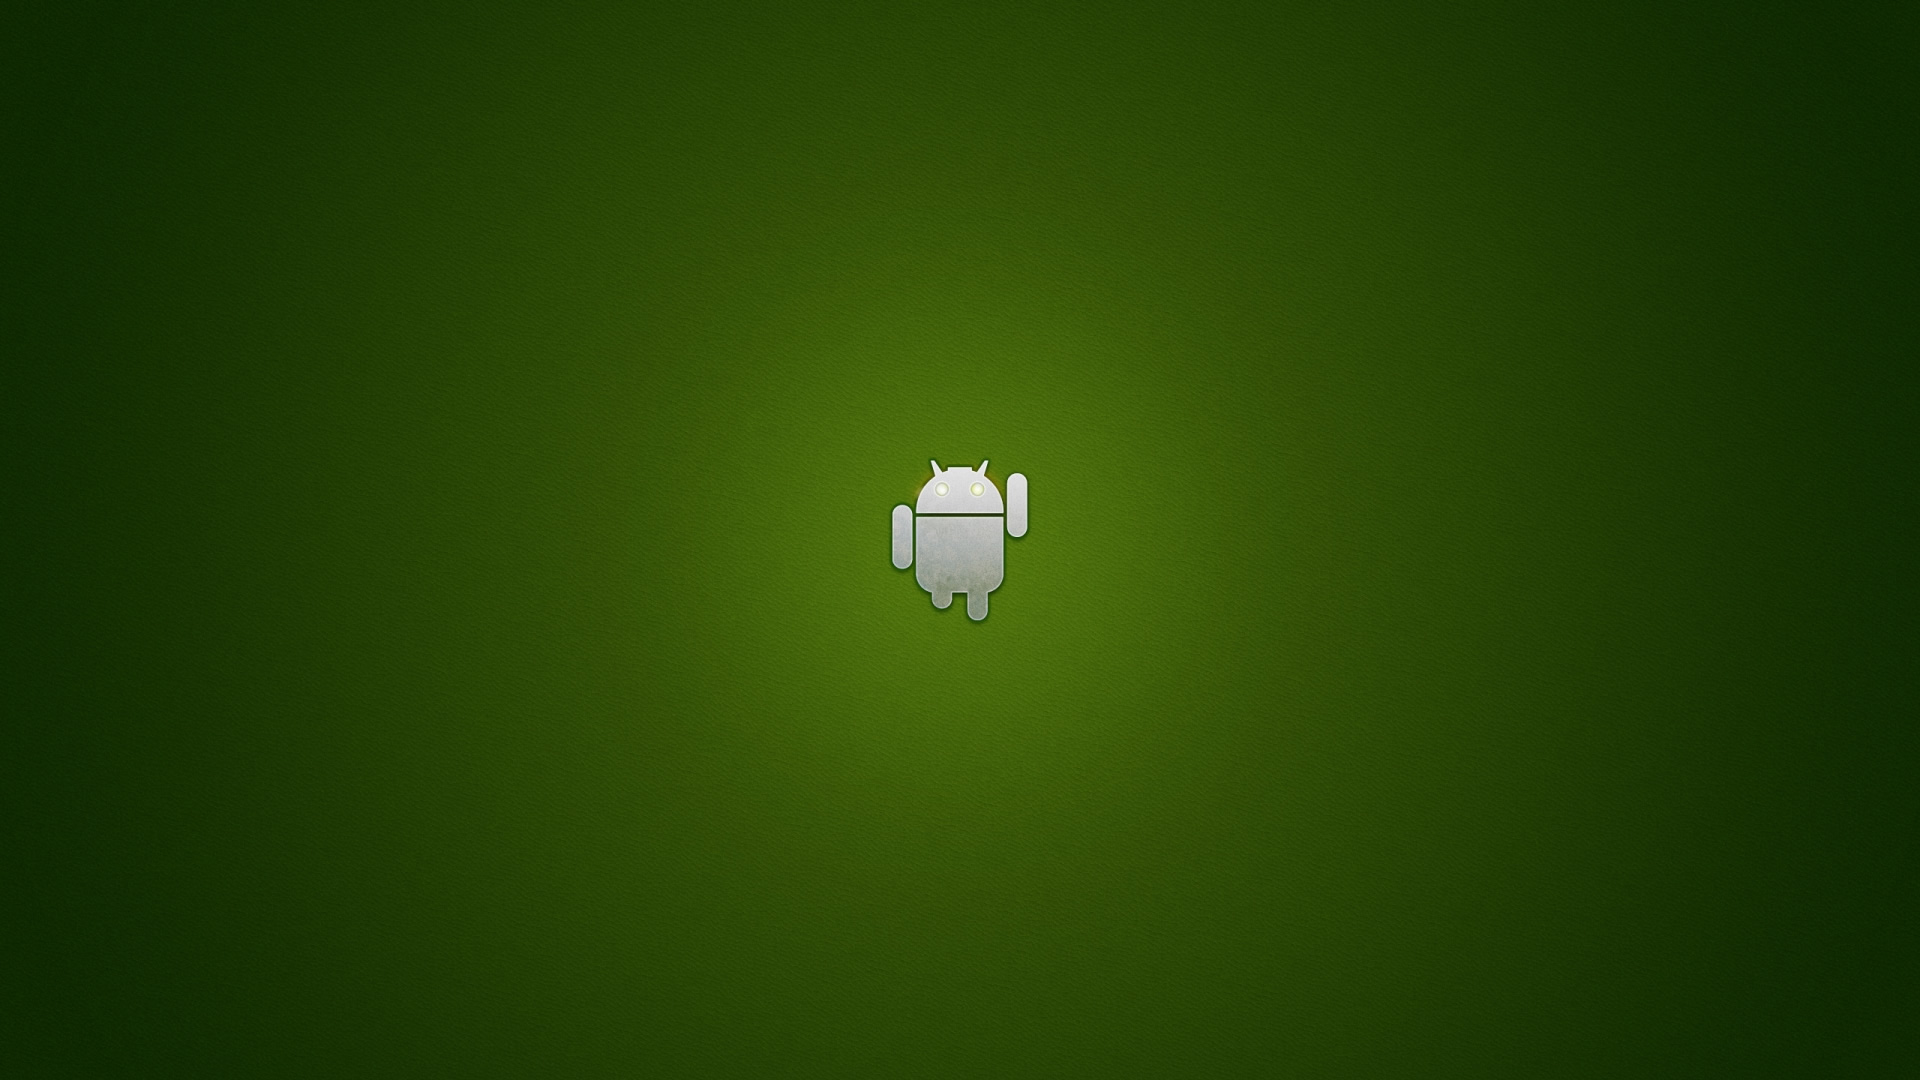 Android tablet wallpaper